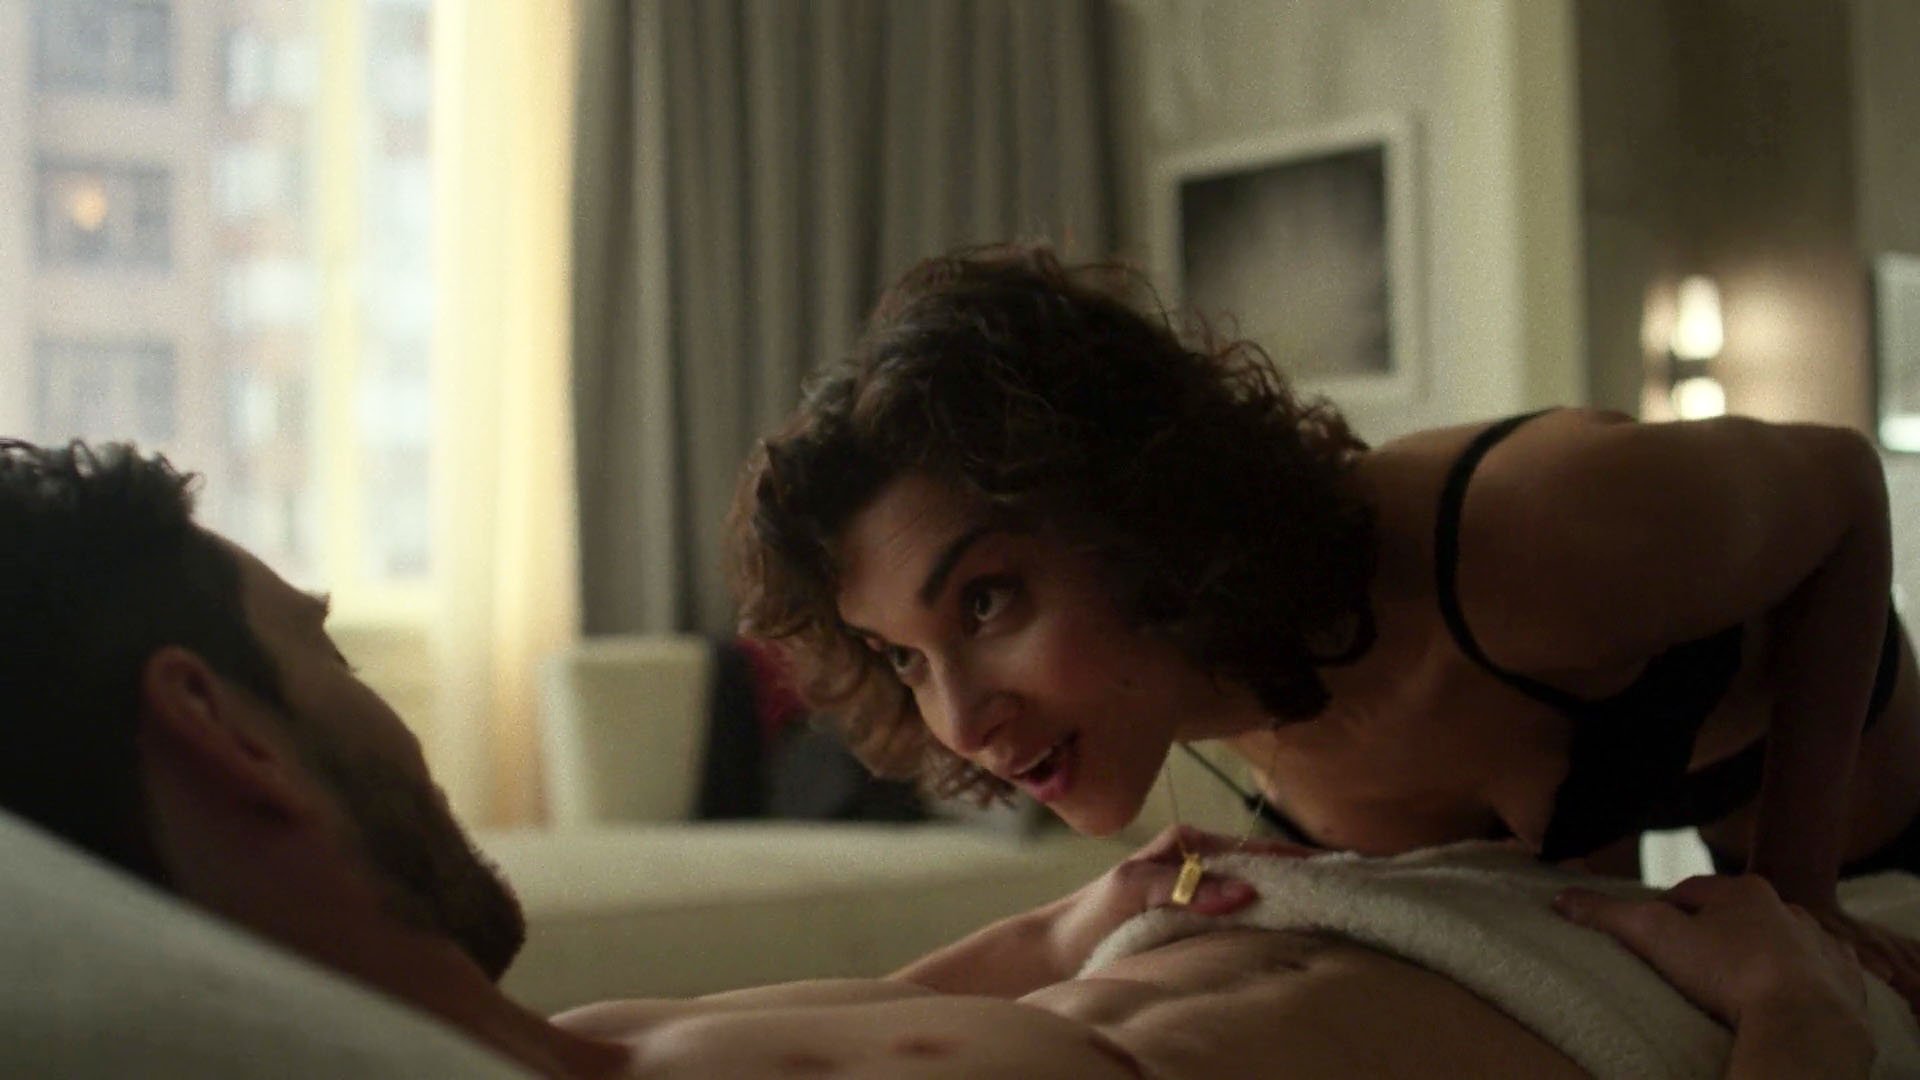 Amber rose revah porn - 🧡 Amber rose revah nude 41 Sexiest Pictures O...